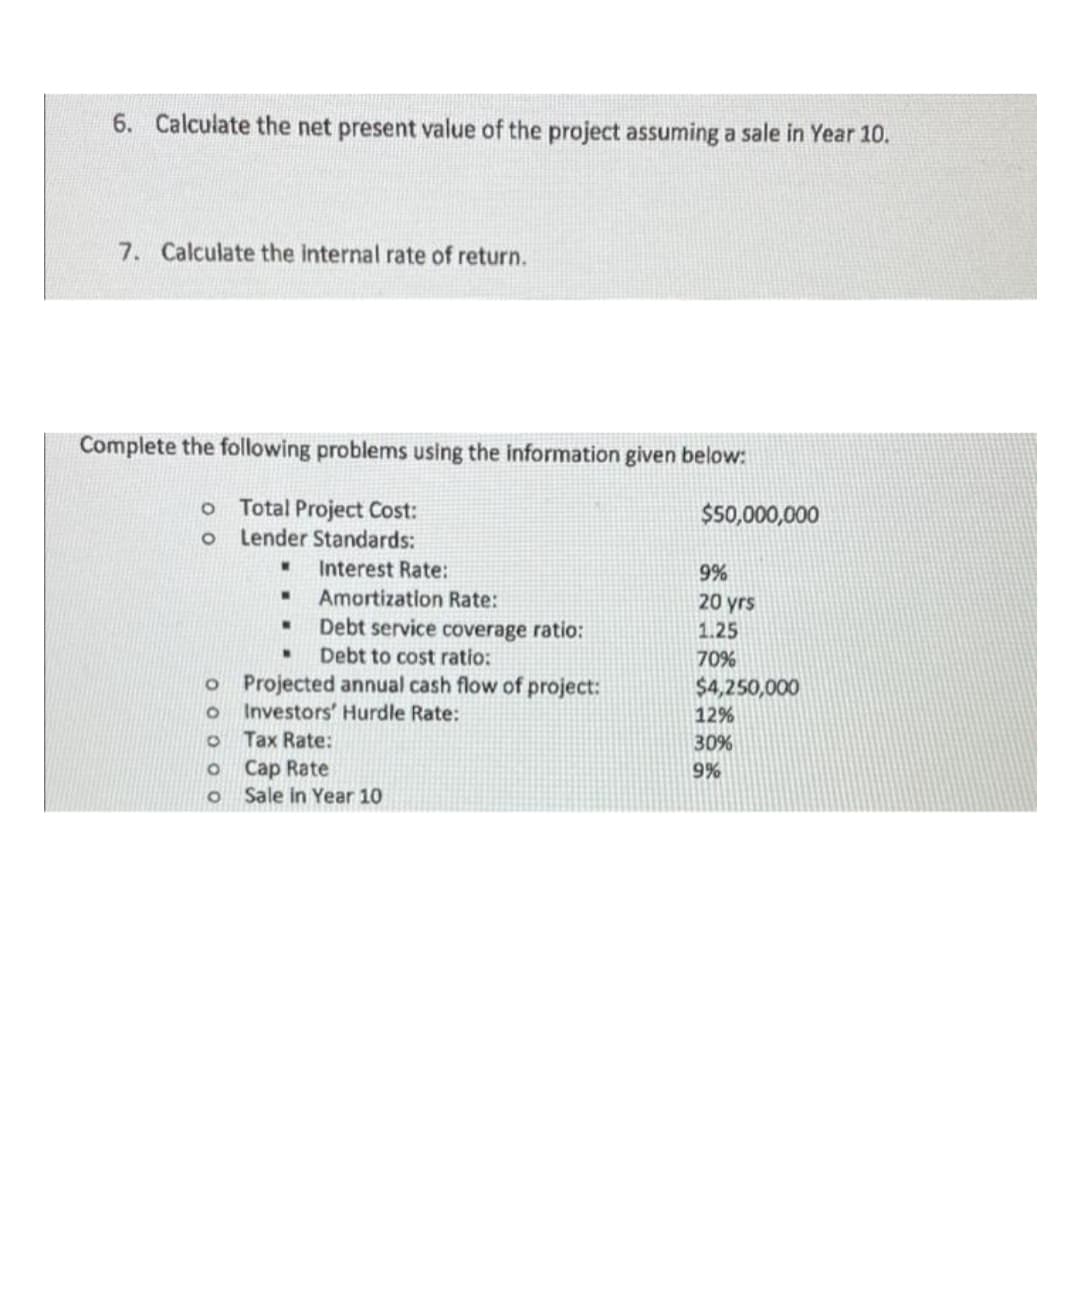 6. Calculate the net present value of the project assuming a sale in Year 10.
7. Calculate the internal rate of return.
Complete the following problems using the information given below:
Total Project Cost:
Lender Standards:
$50,000,000
Interest Rate:
9%
Amortization Rate:
20 yrs
Debt service coverage ratio:
Debt to cost ratio:
1.25
70%
o Projected annual cash flow of project:
Investors' Hurdle Rate:
$4,250,000
12%
Tax Rate:
30%
o Cap Rate
Sale in Year 10
9%
O O 0 0 O
